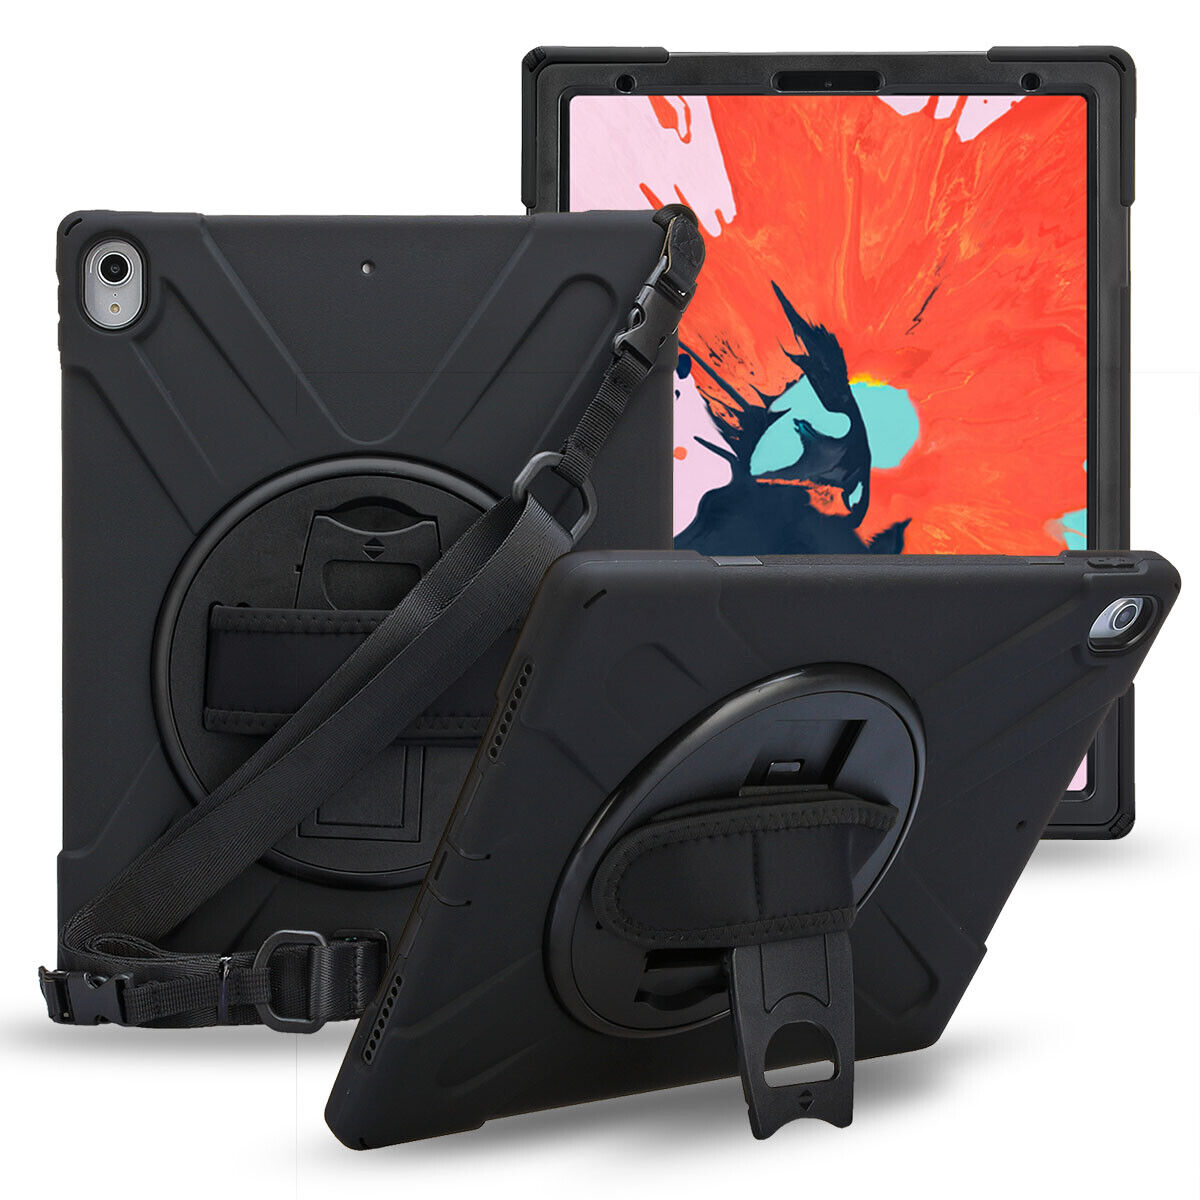 Tough Shockproof Armour Heavy Duty Case Cover For iPad PRO 2021 11/12.9-Inch M1